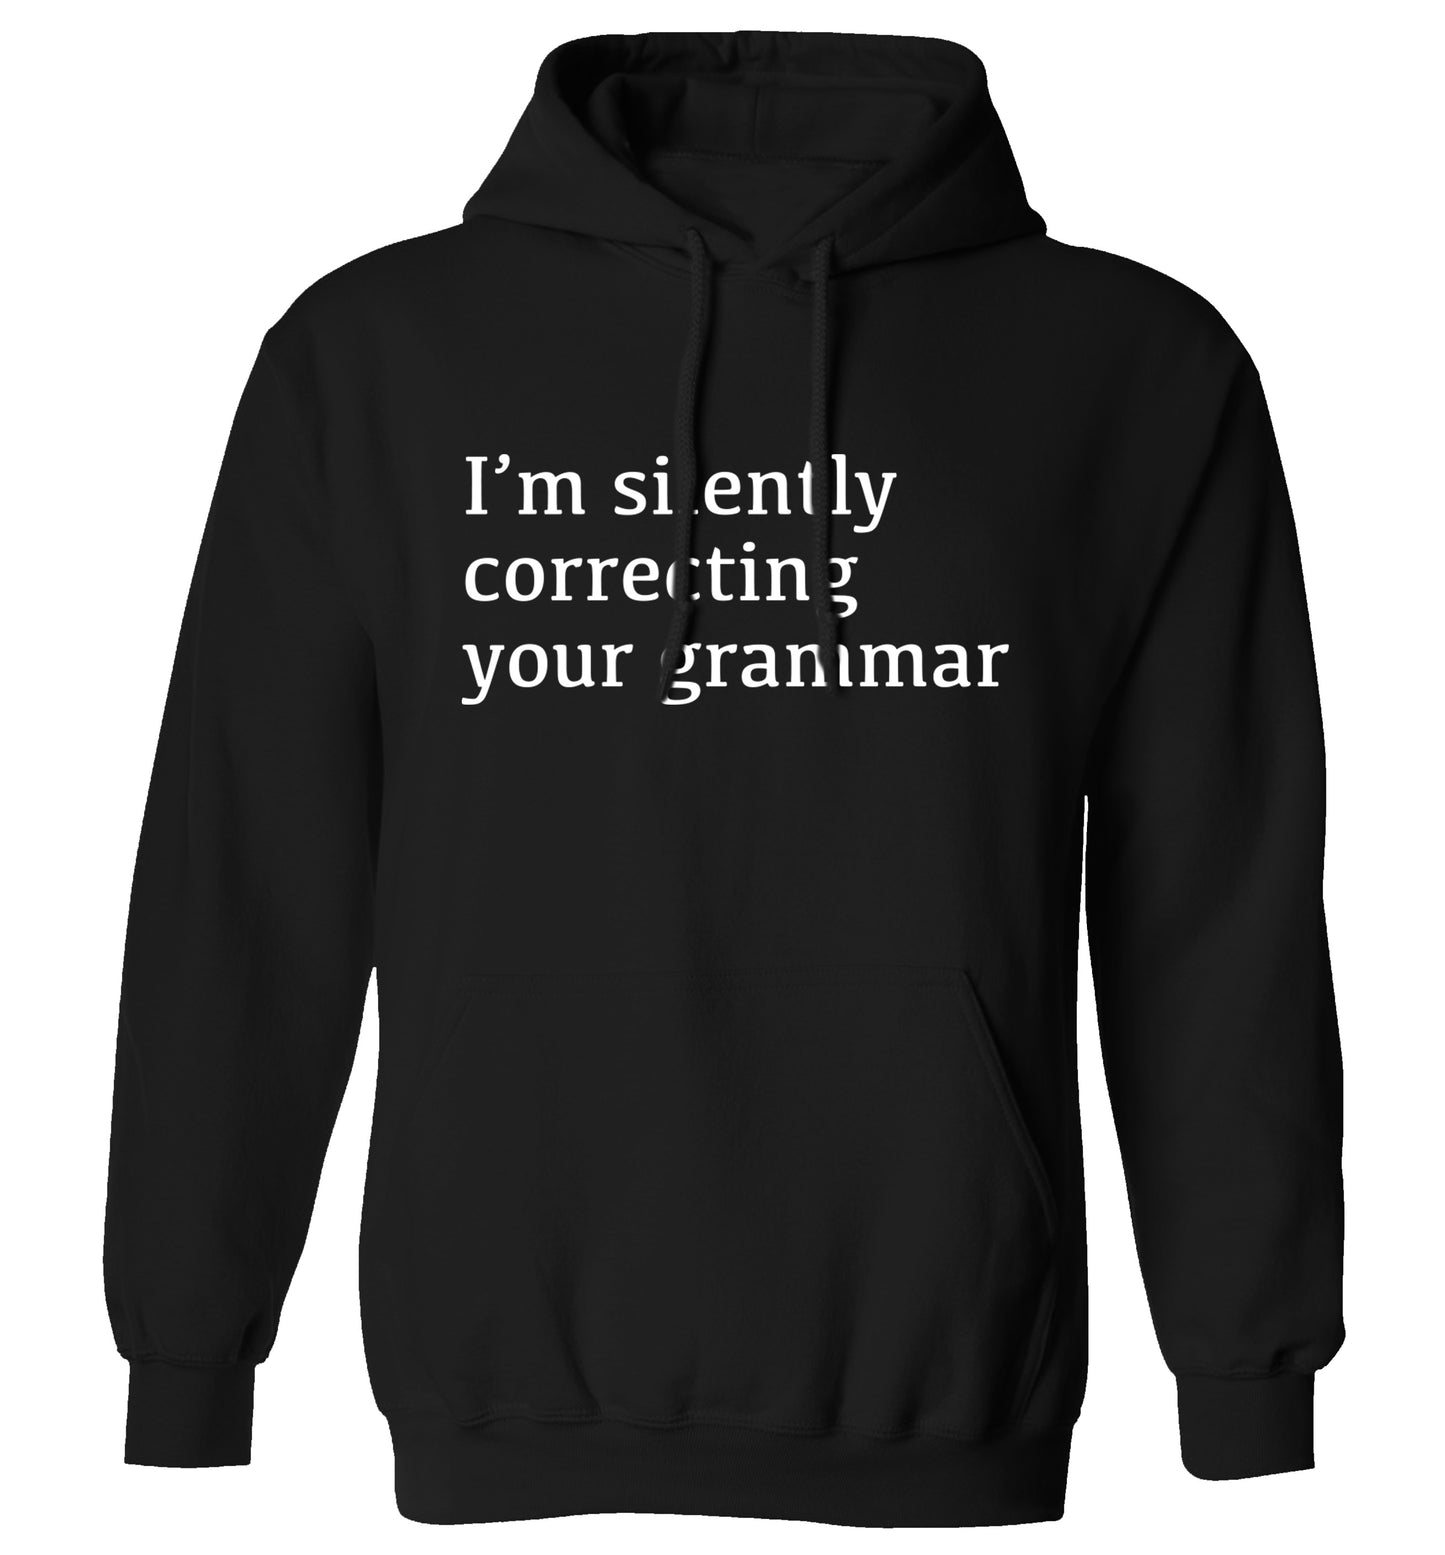 I'm silently correcting your grammar  adults unisex black hoodie 2XL